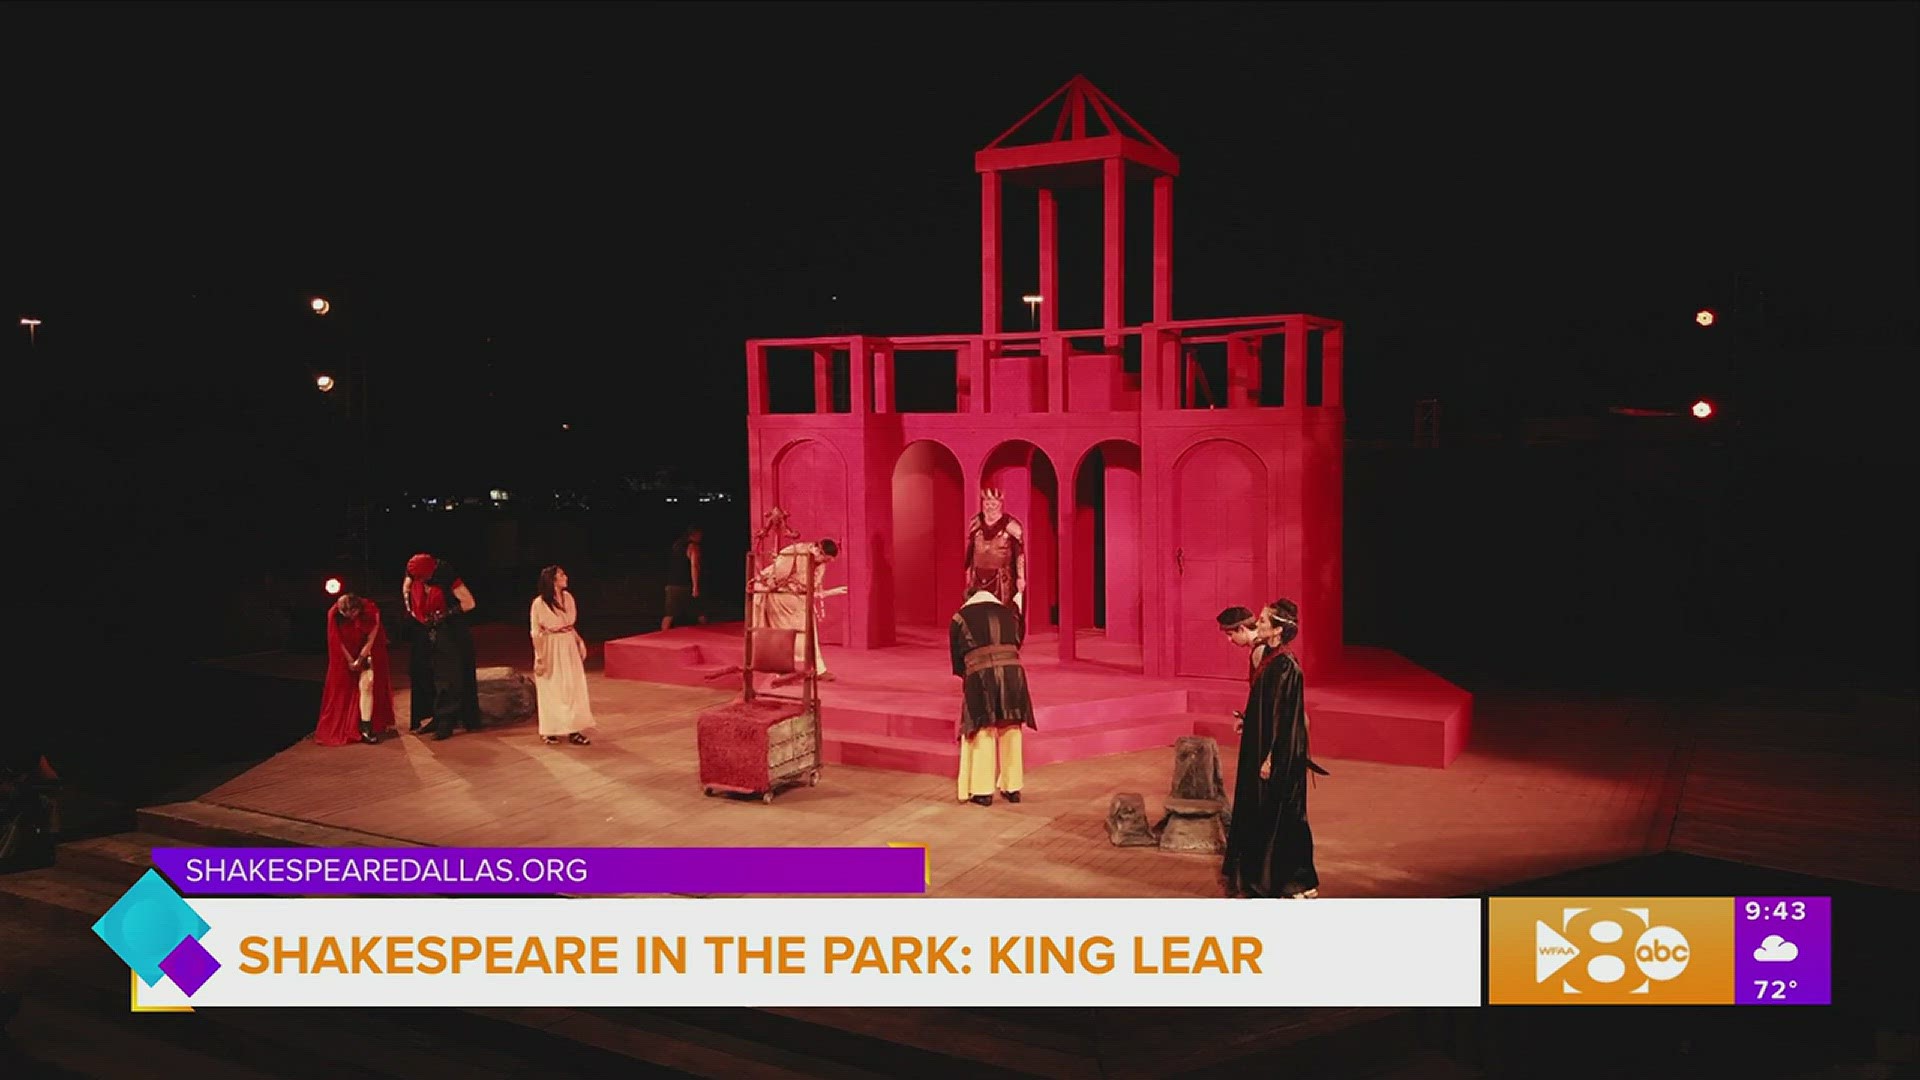 Actors T.A. Taylor and Thi Le talk about King Lear at Shakespeare Dallas. Go to shakespearedallas.org for more information.